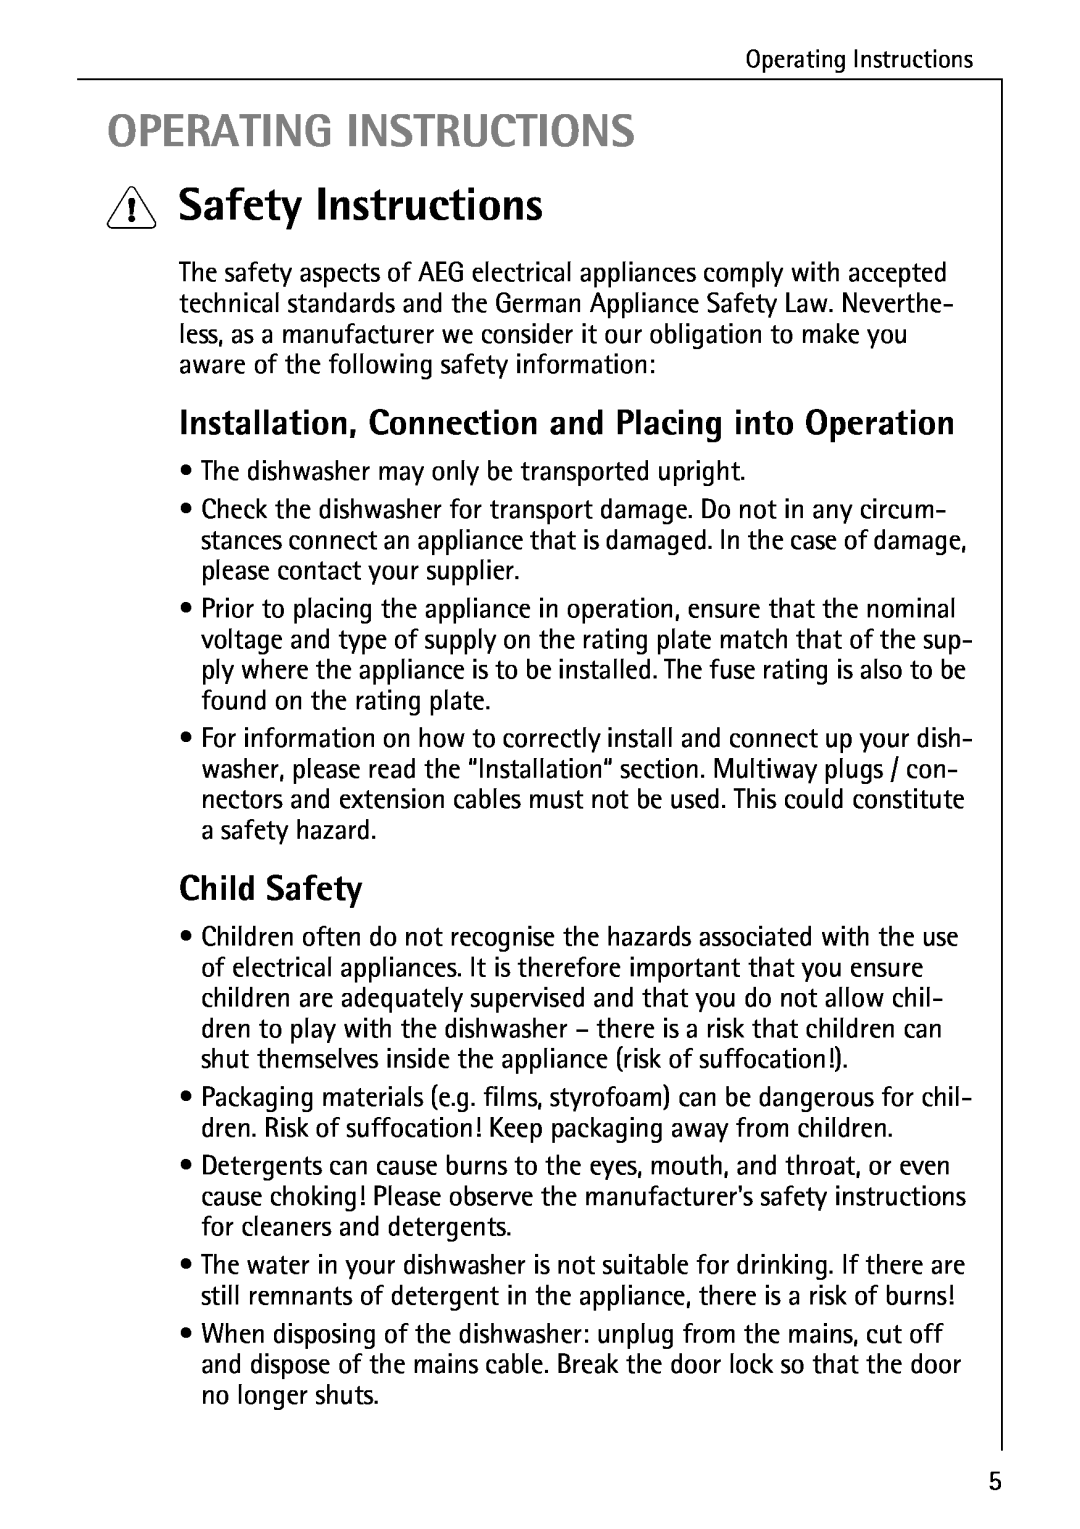 AEG 80800 Operating Instructions, Safety Instructions, Installation, Connection and Placing into Operation, Child Safety 